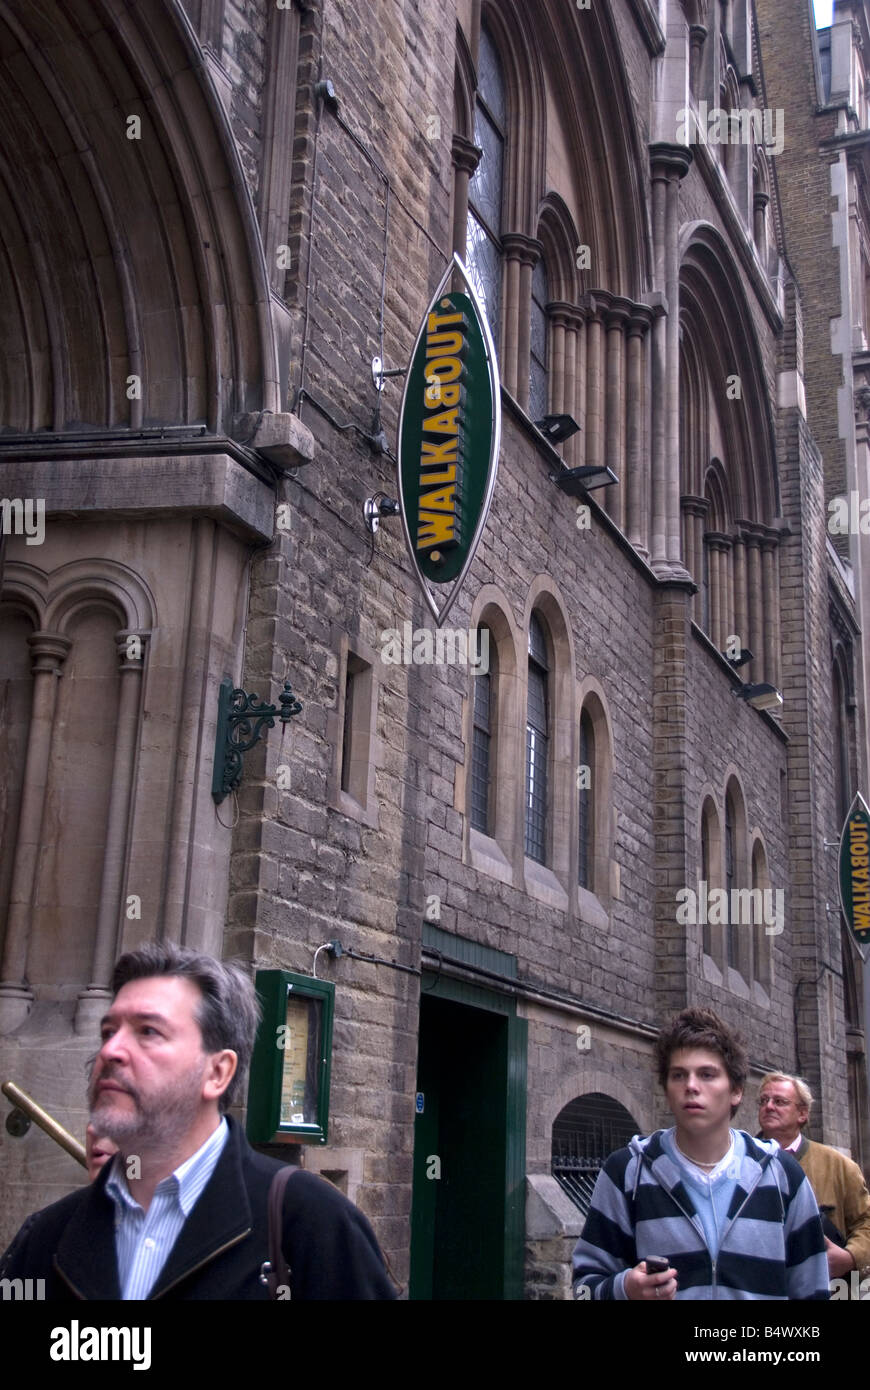 Walkabout pub Shaftesbury Avenue London located in an old church Stock Photo